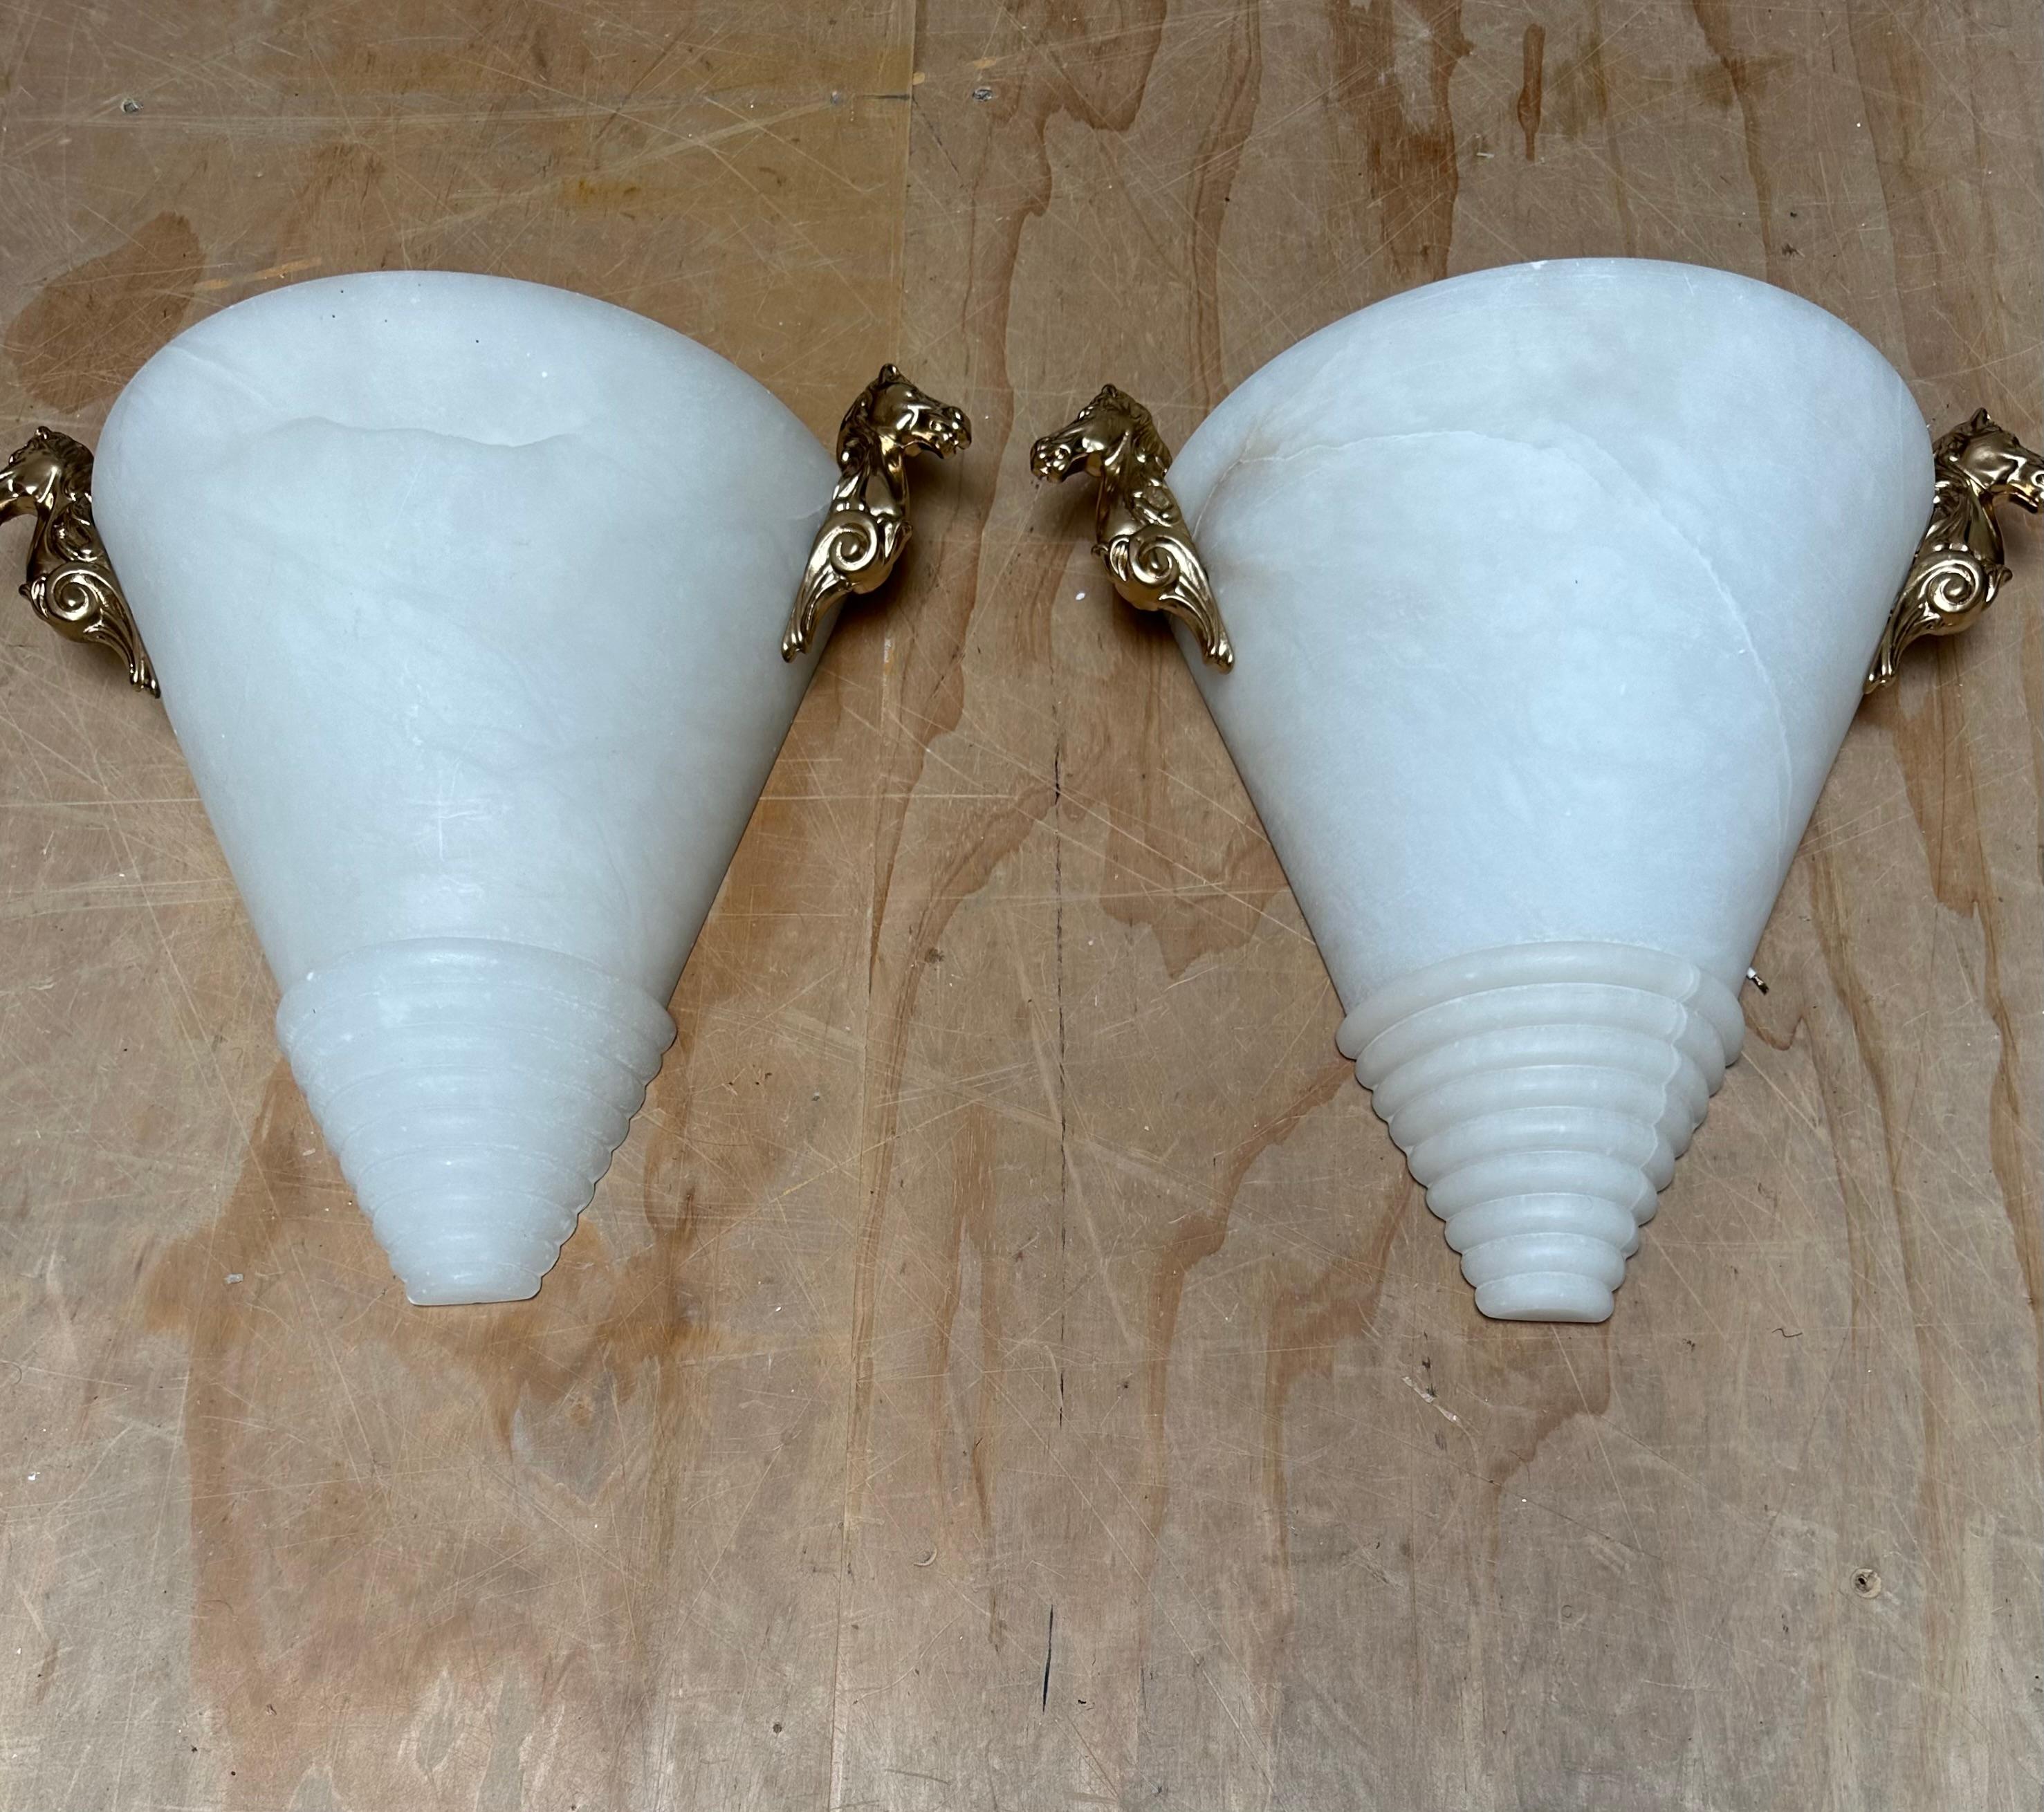 Midcentury Pair Art Deco Design Alabaster Wall Sconces with Horse Sculptures For Sale 8